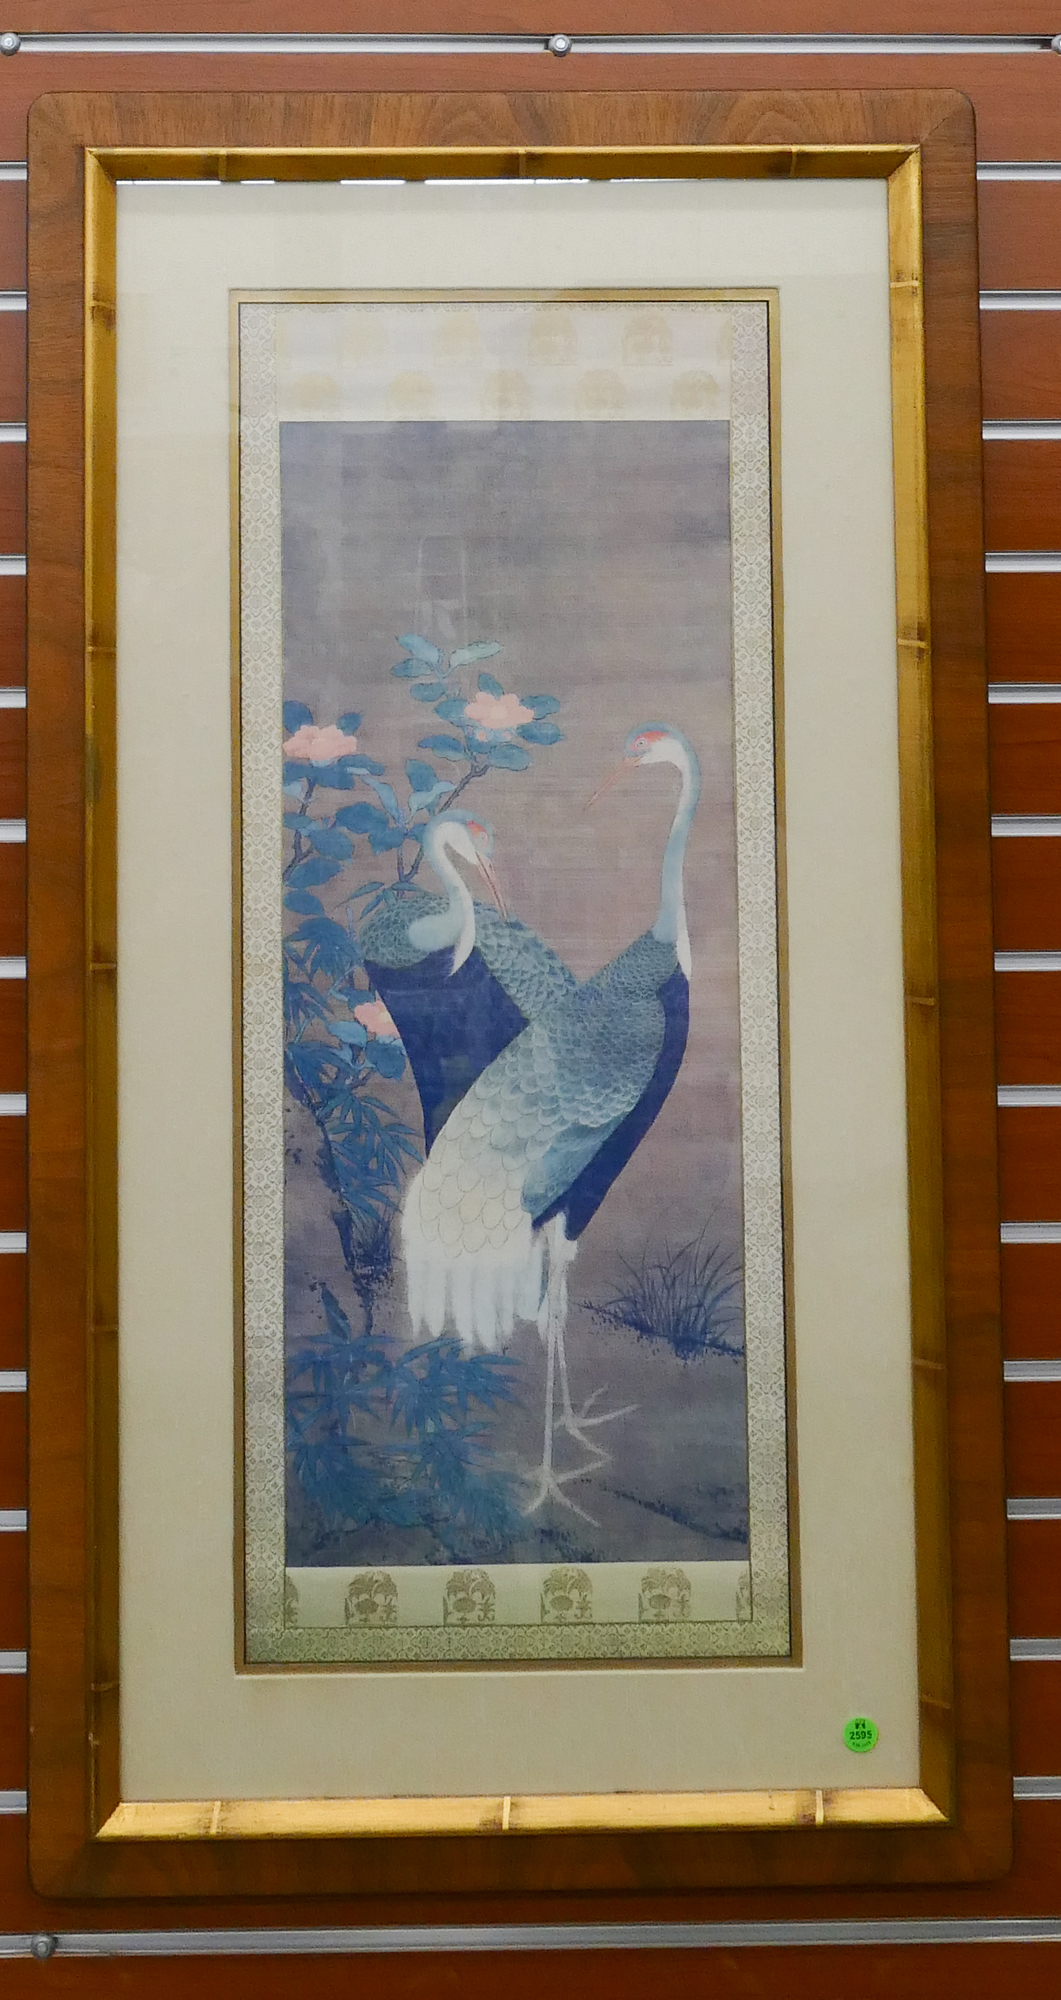 Japanese Cranes Framed Asian Style 368a60